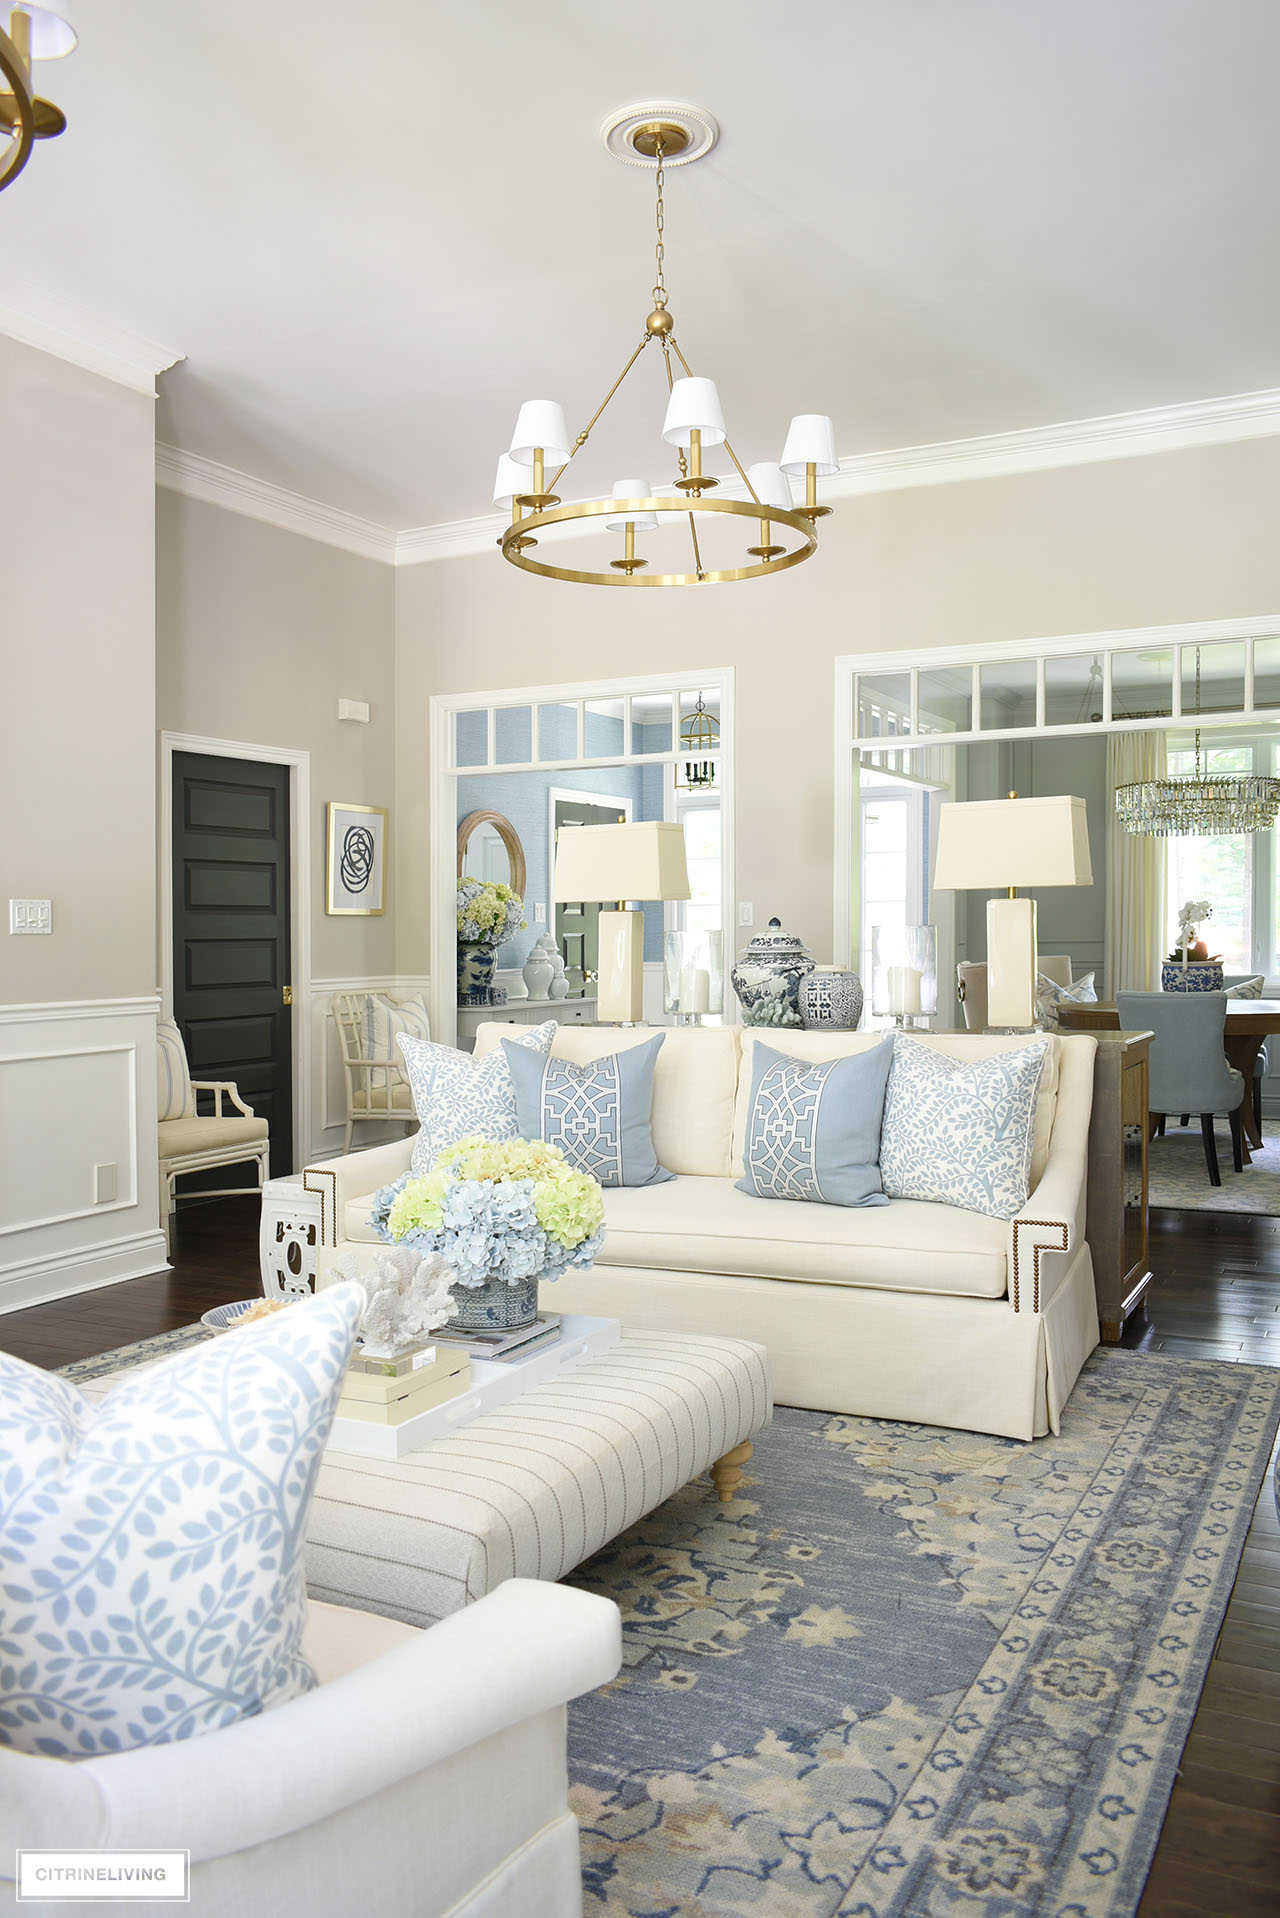 Chic summer living room decor featuring an elegant light blue and warm white color palette, blue and green hydrangeas and coastal accents.